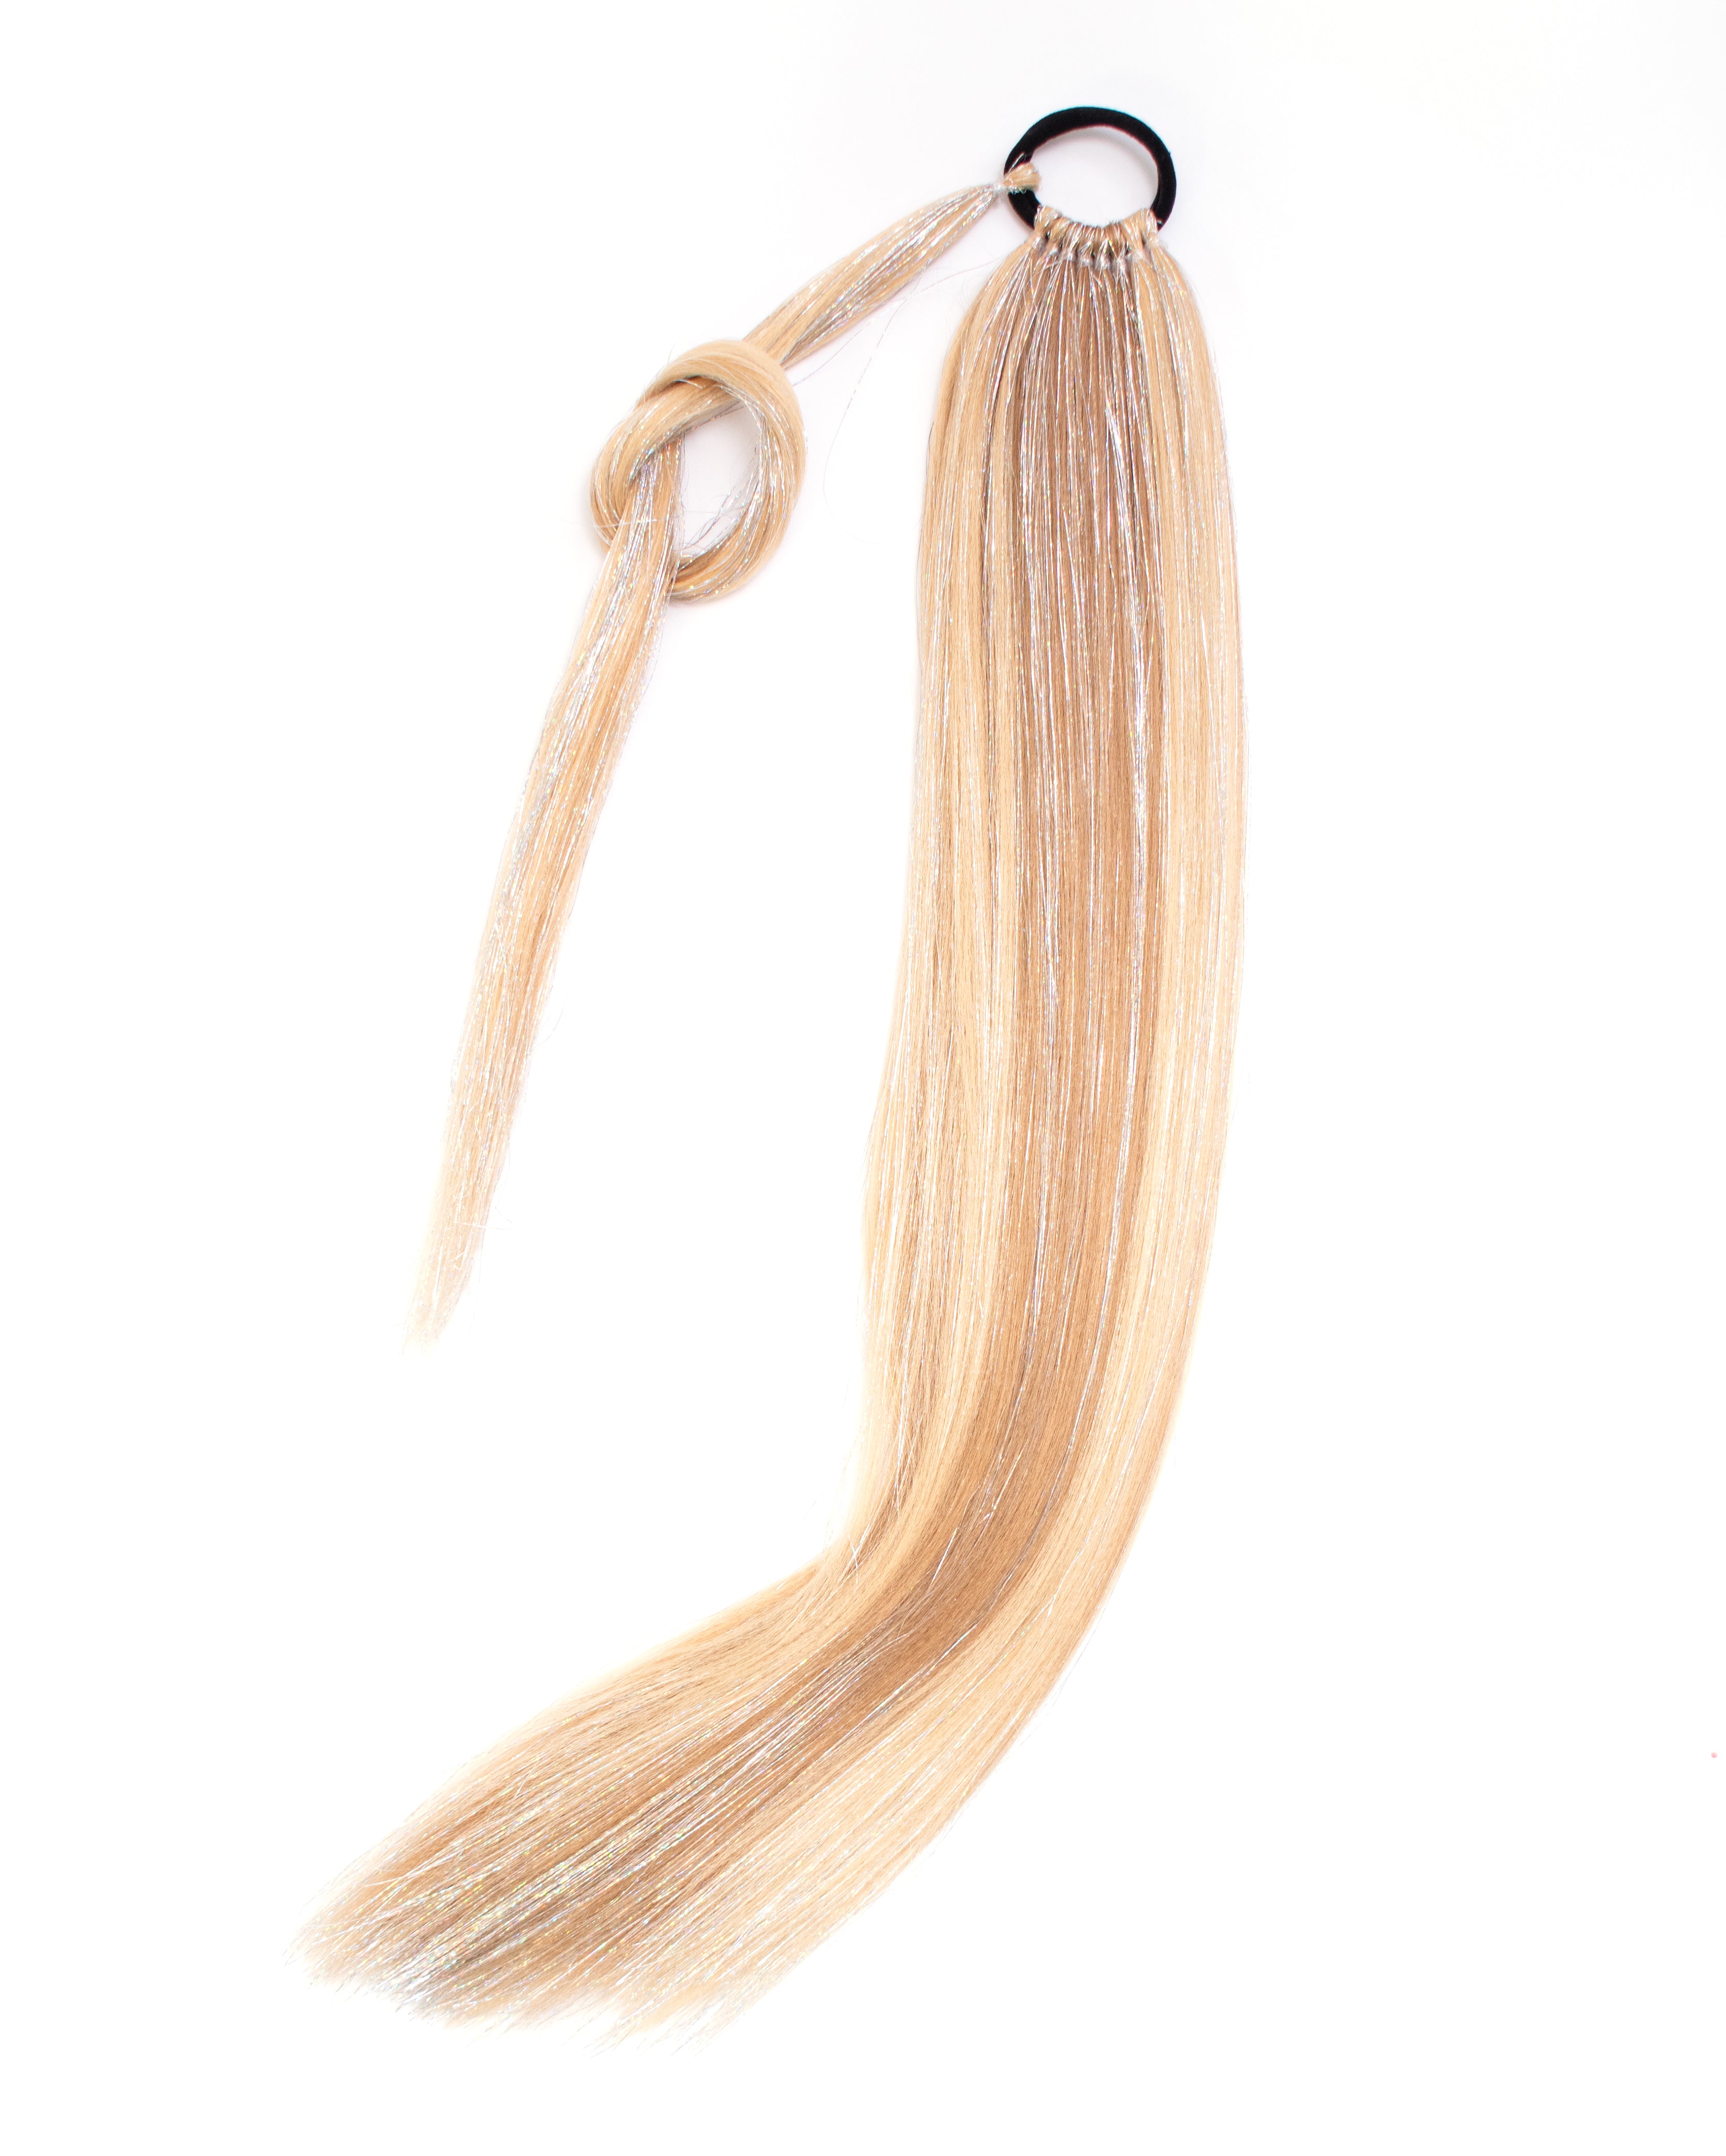 Champagne Sparkle - Blonde Ponytail Hair Extension with Silver Tinsel - Lunautics